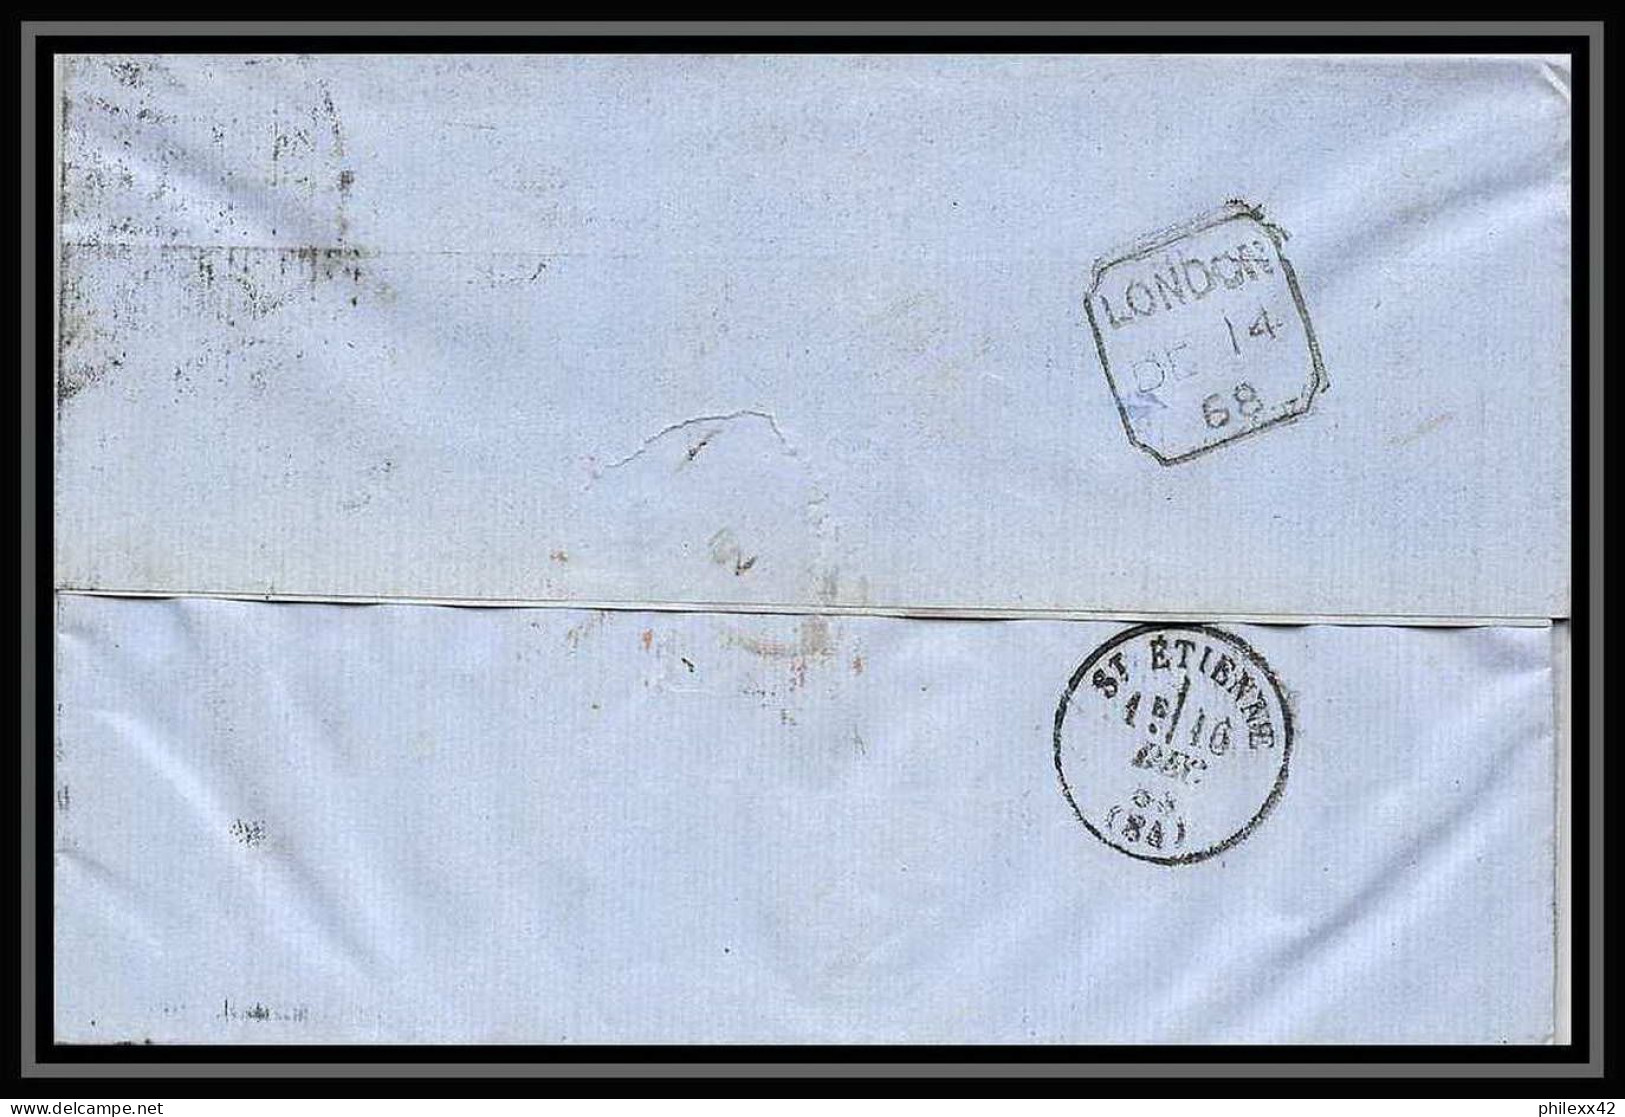 35656 N°32 Victoria 4p Red London St Etienne France 1868 Cachet 47 Lettre Cover Grande Bretagne England - Covers & Documents